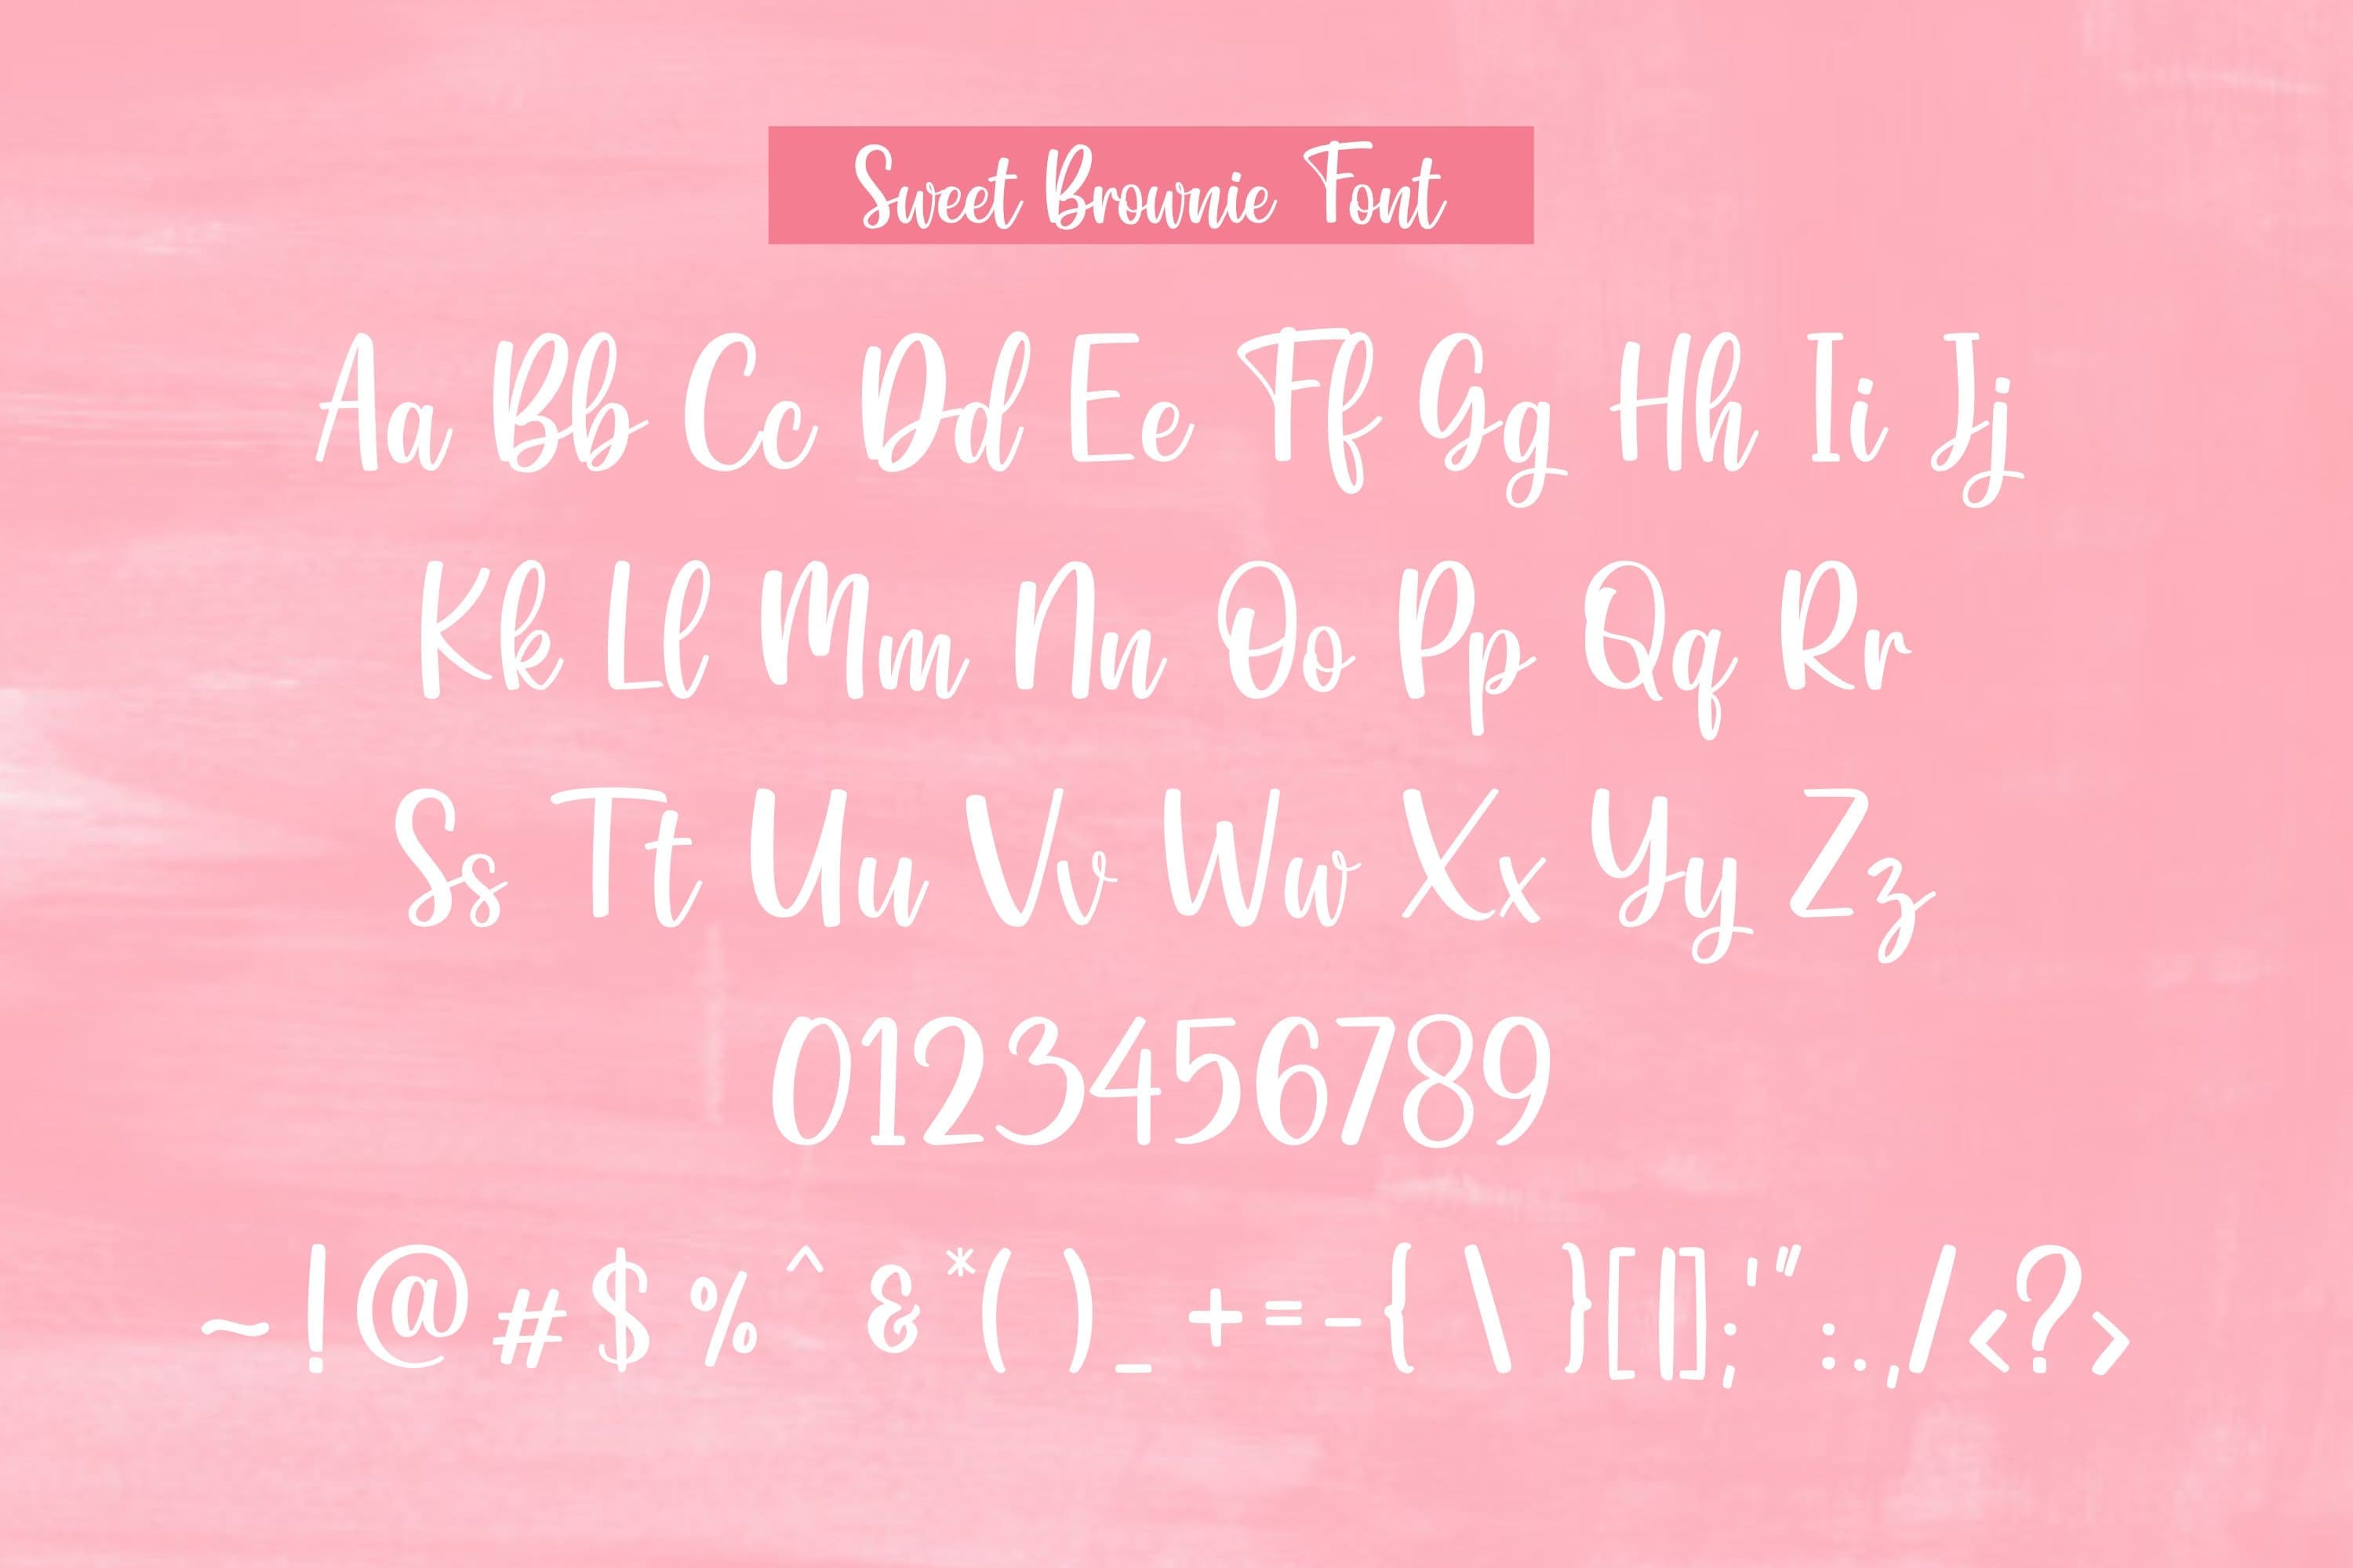 Sweet Brownie Font - Alphabet on pink background.